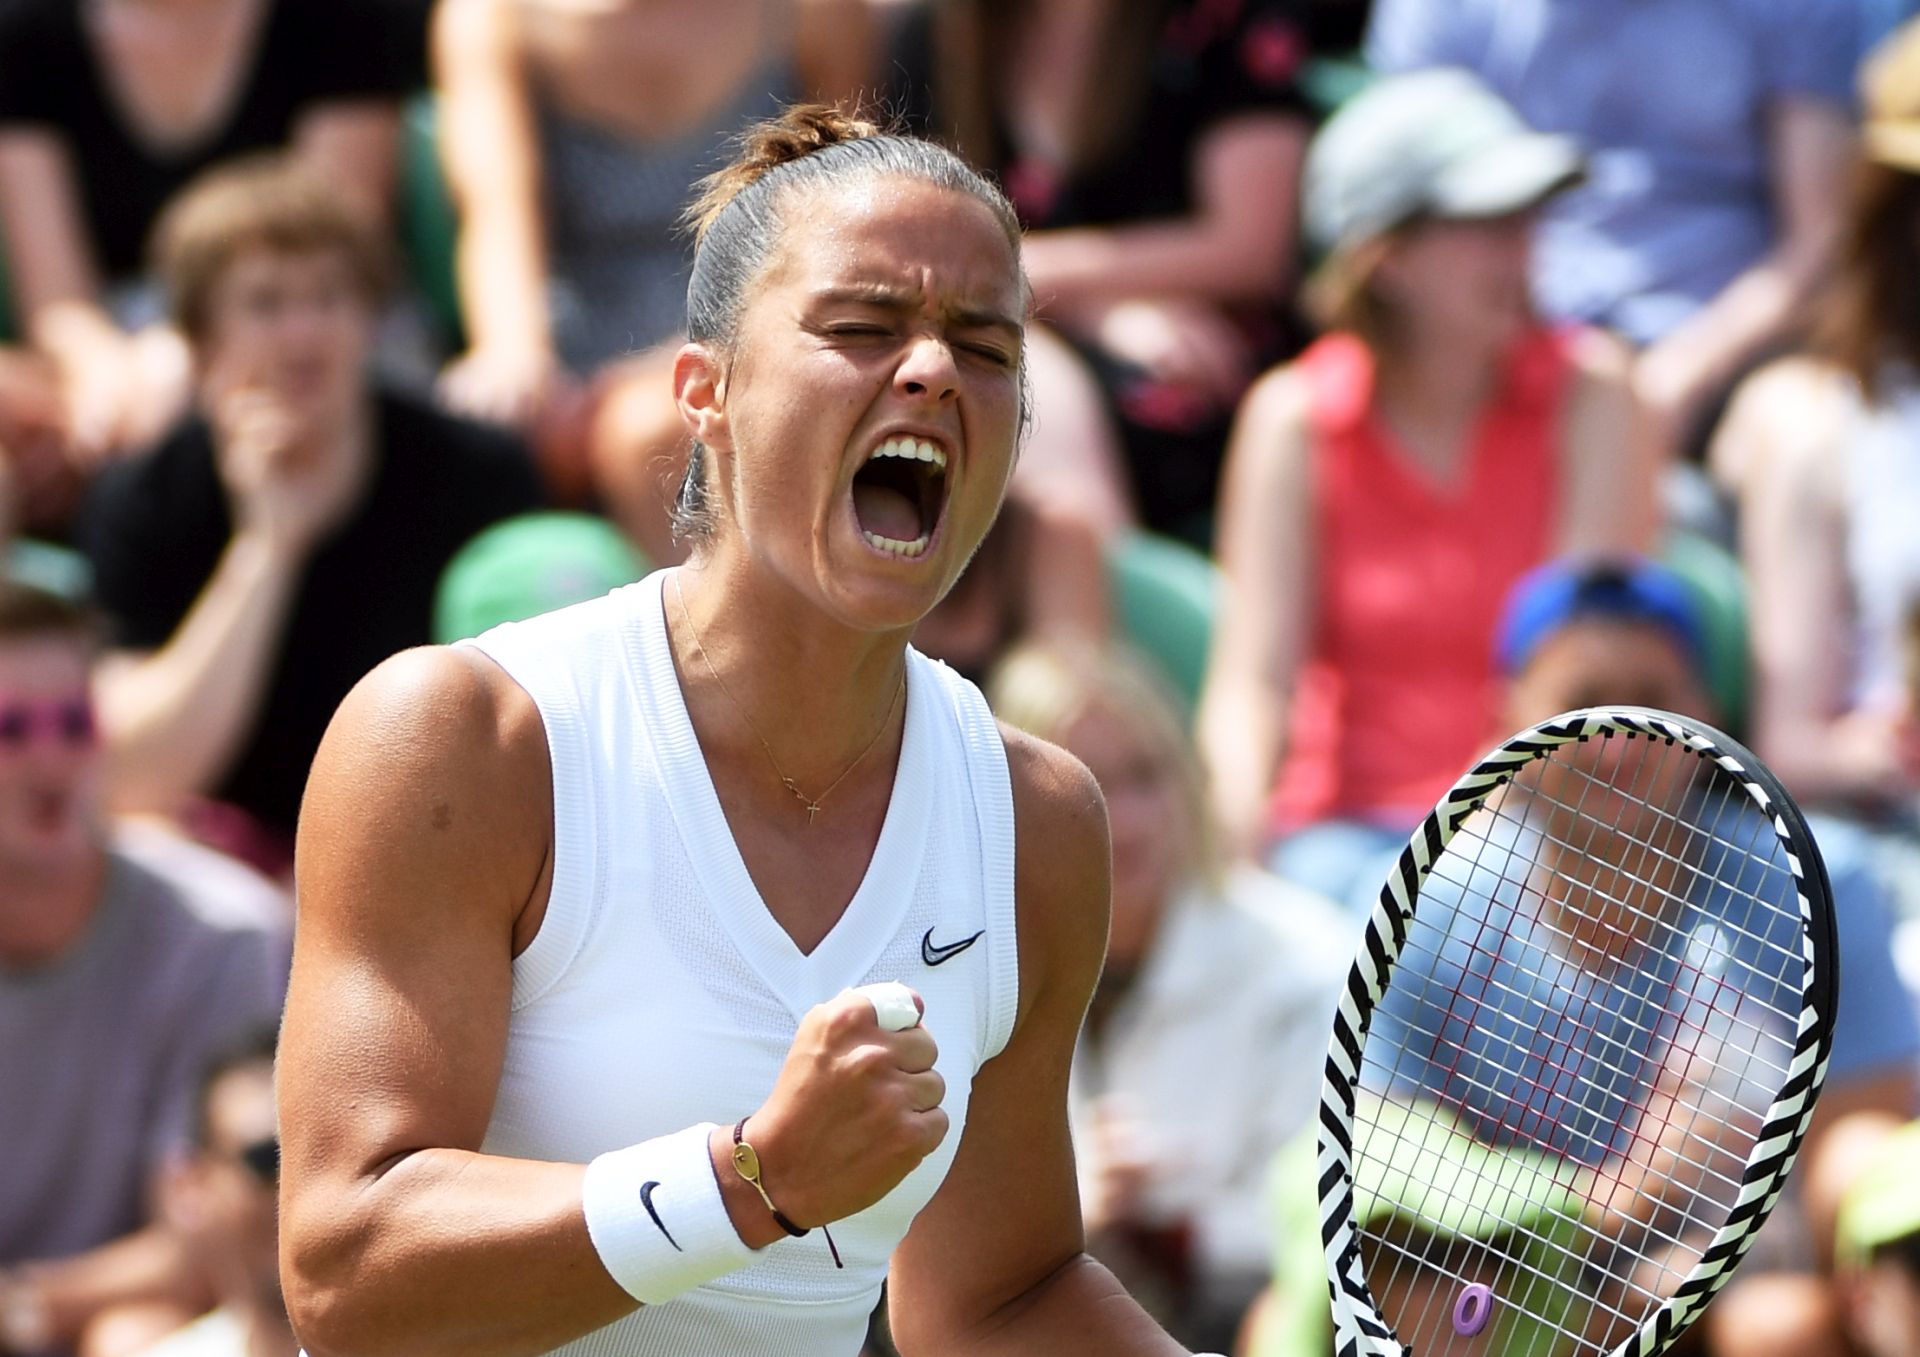 epa07696911 Maria Sakkari of Greece scores a set point winner against Elina Svitolina of Ukraine in their third round match  during the Wimbledon Championships at the All England Lawn Tennis Club, in London, Britain, 05 July 2019. EPA/FACUNDO ARRIZABALAGA EDITORIAL USE ONLY/NO COMMERCIAL SALES